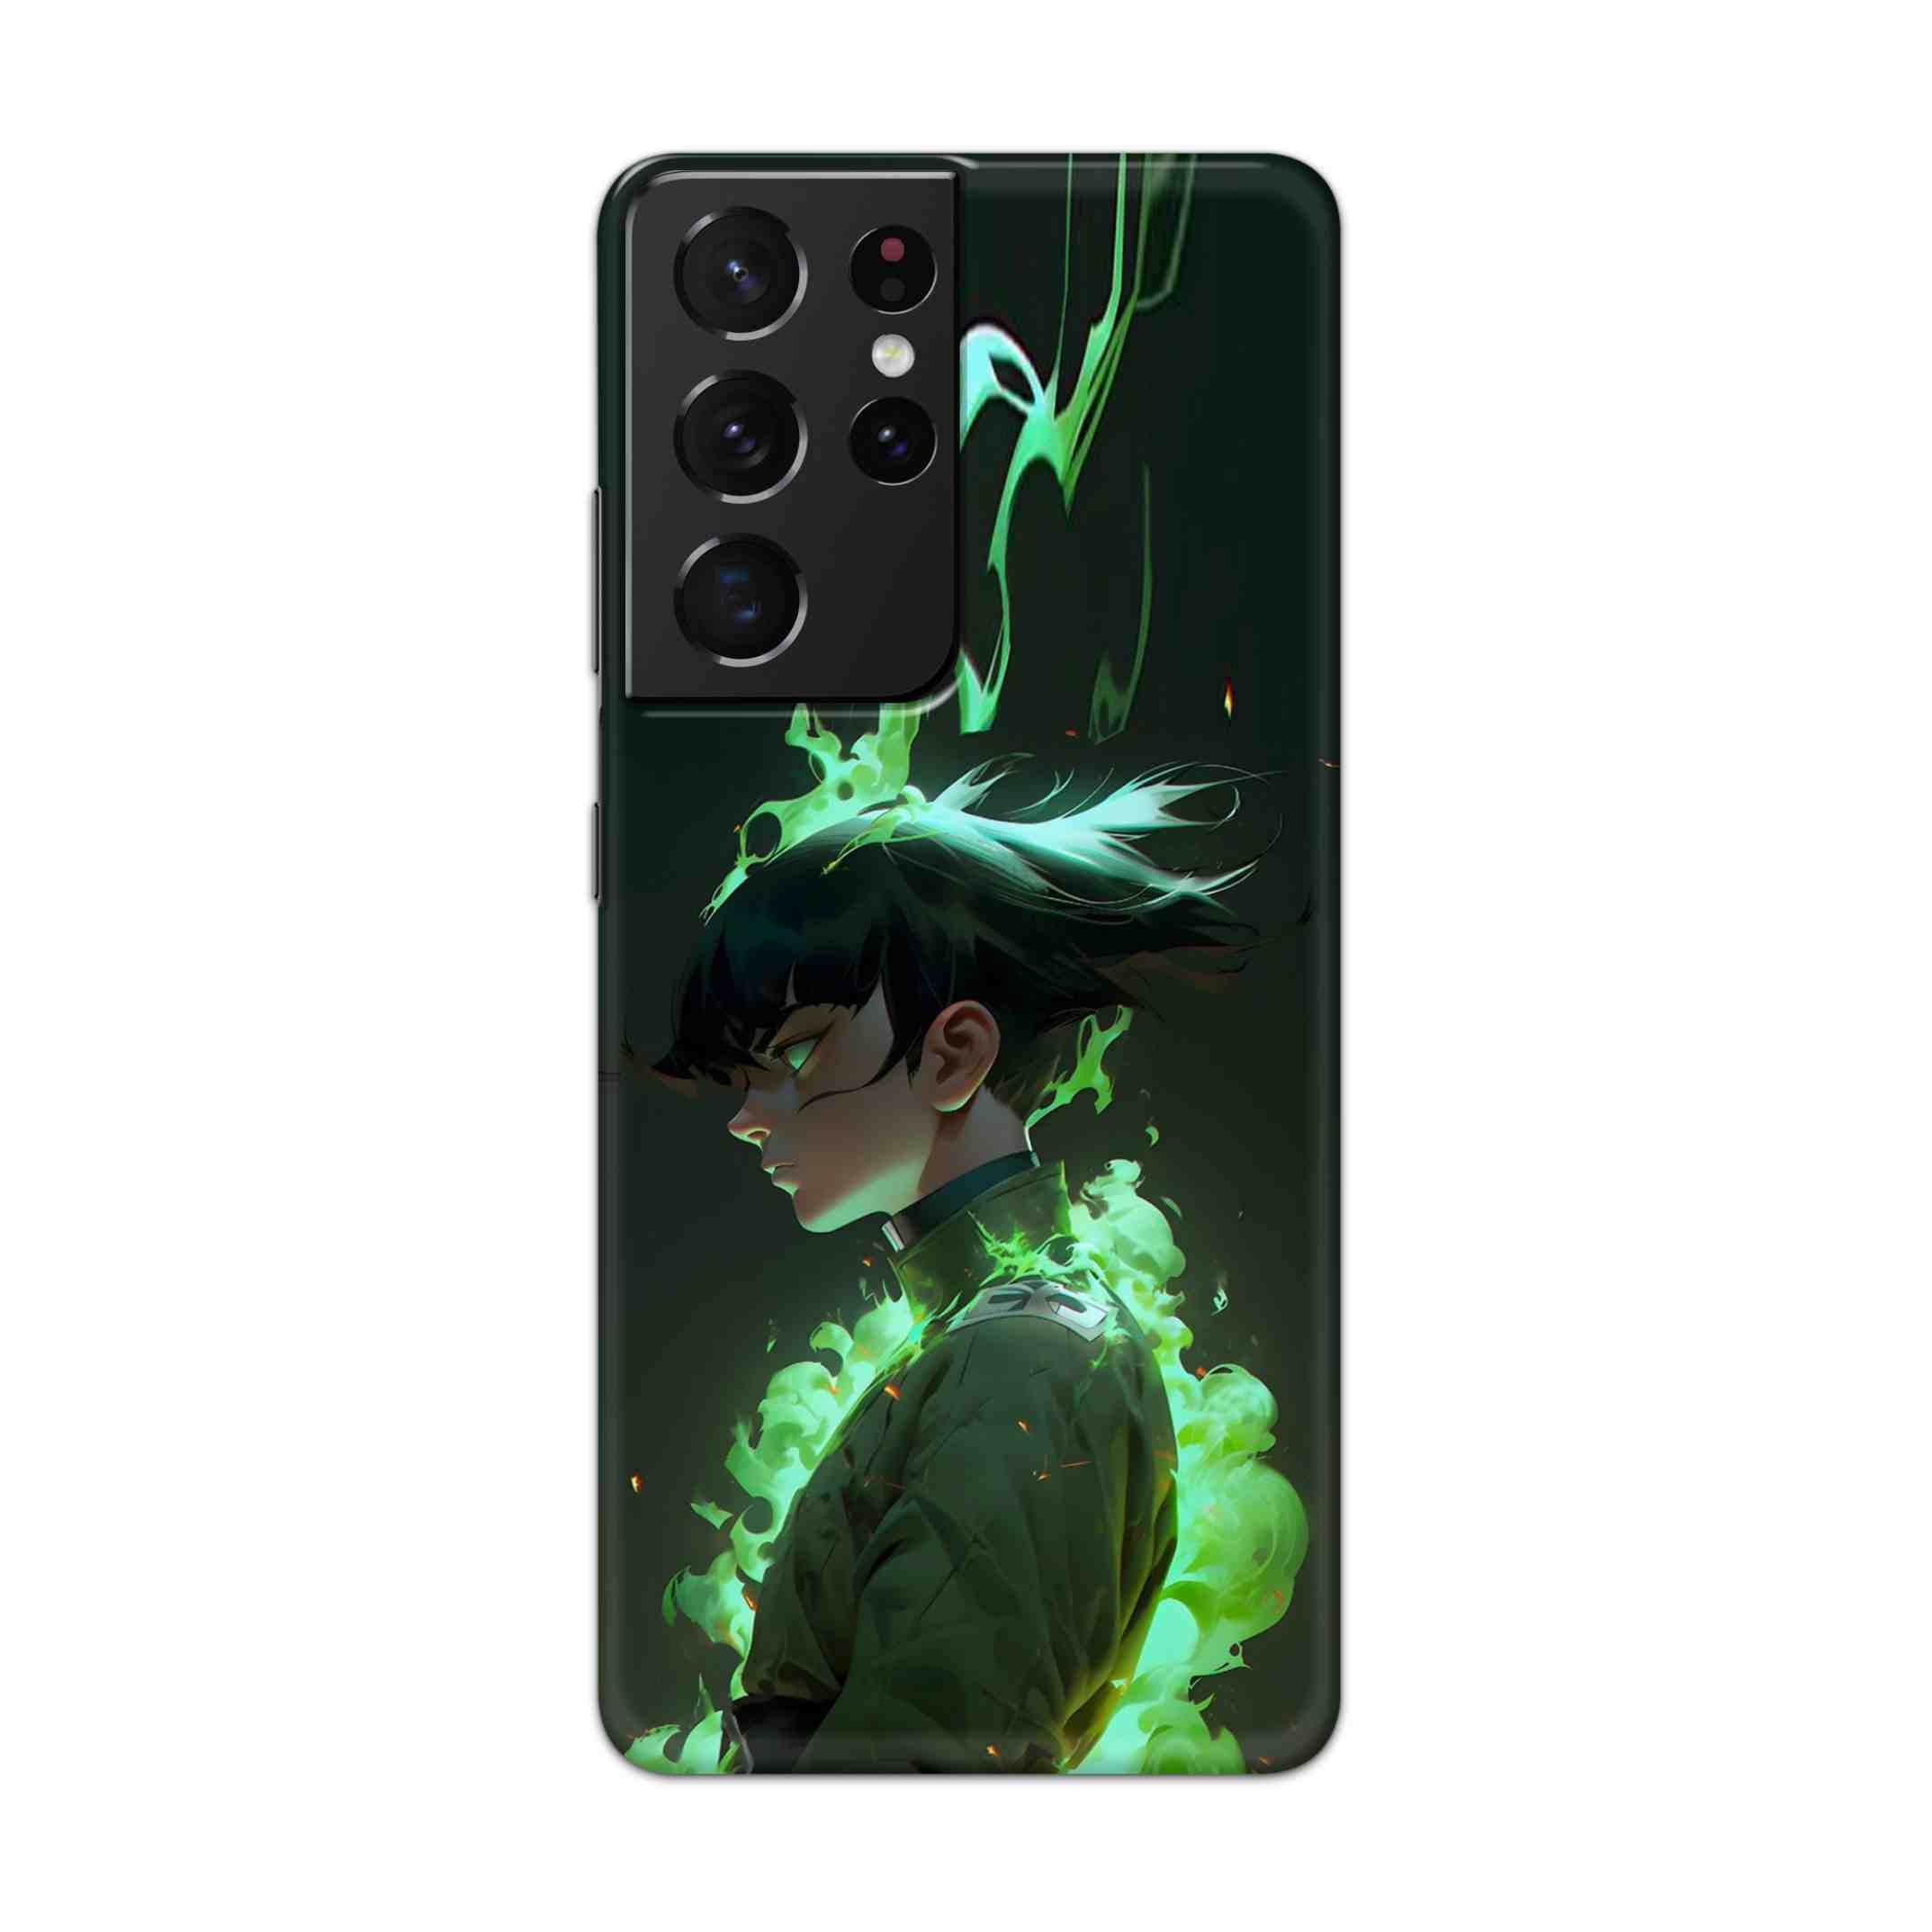 Buy Akira Hard Back Mobile Phone Case Cover For Samsung Galaxy S21 Ultra Online